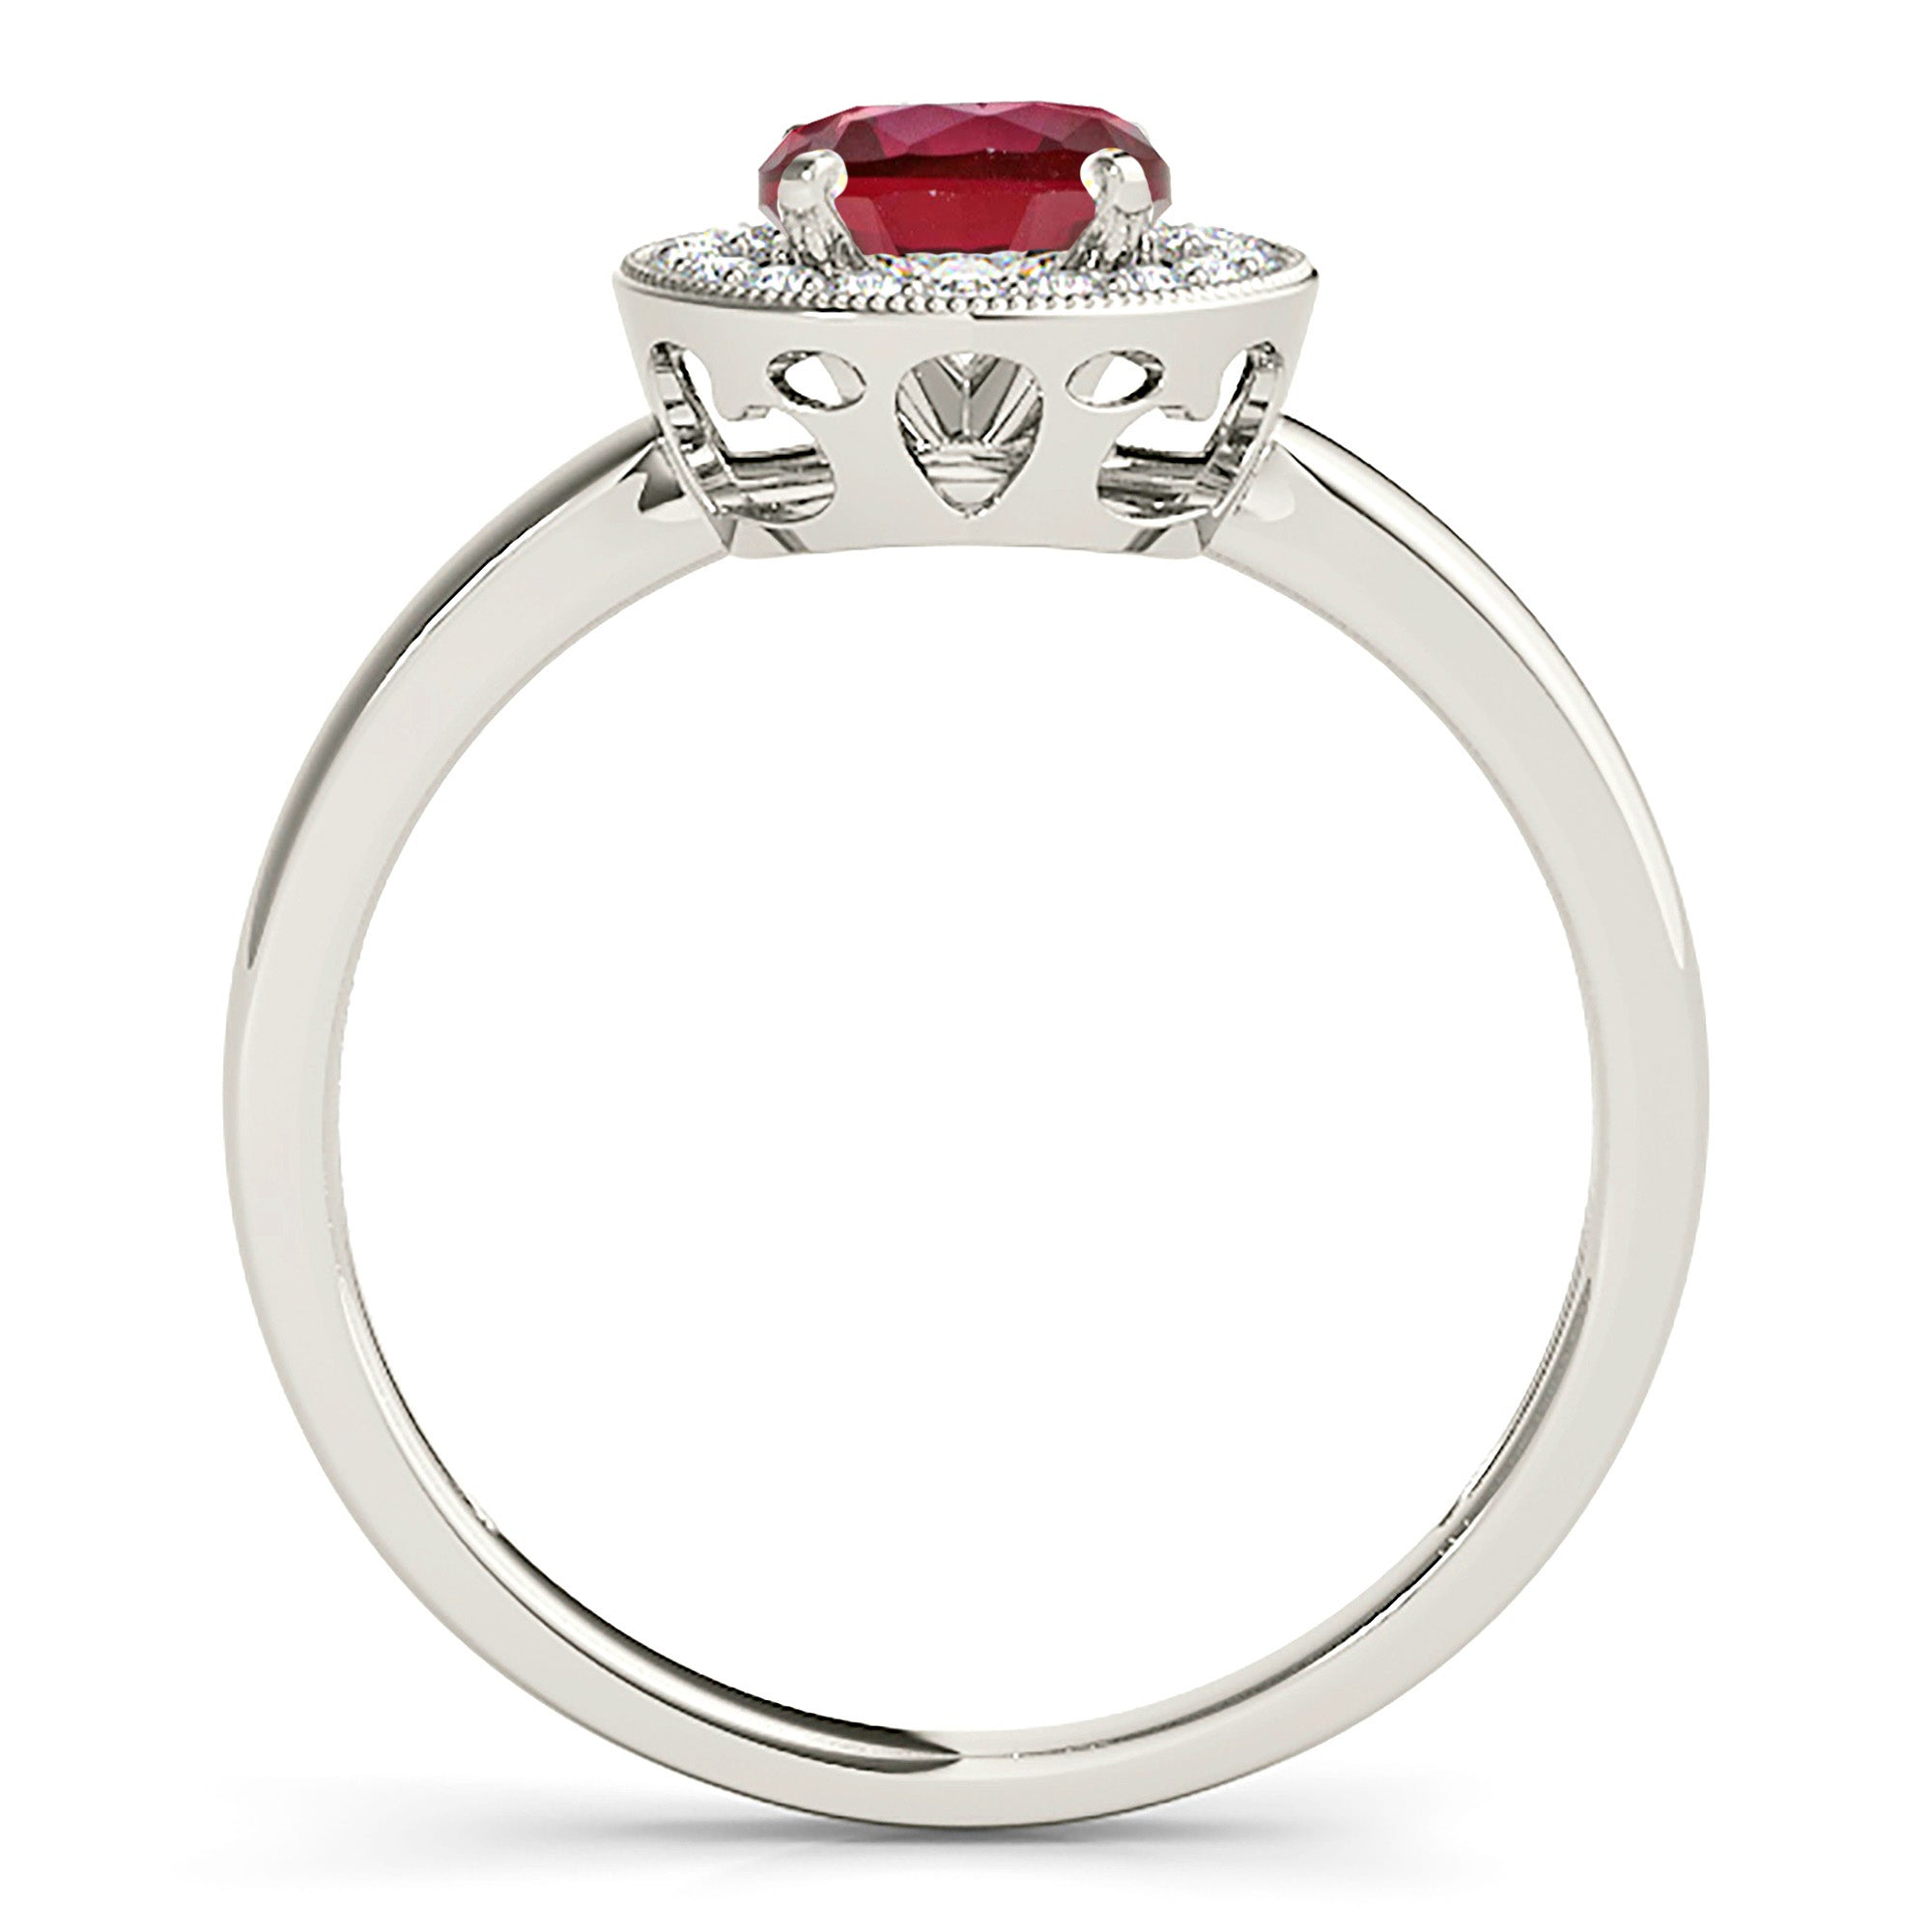 1.35 ct. Genuine Ruby Ring With 0.20 ctw. Diamond Milgrain Halo And Solid gold Plain Band-in 14K/18K White, Yellow, Rose Gold and Platinum - Christmas Jewelry Gift -VIRABYANI